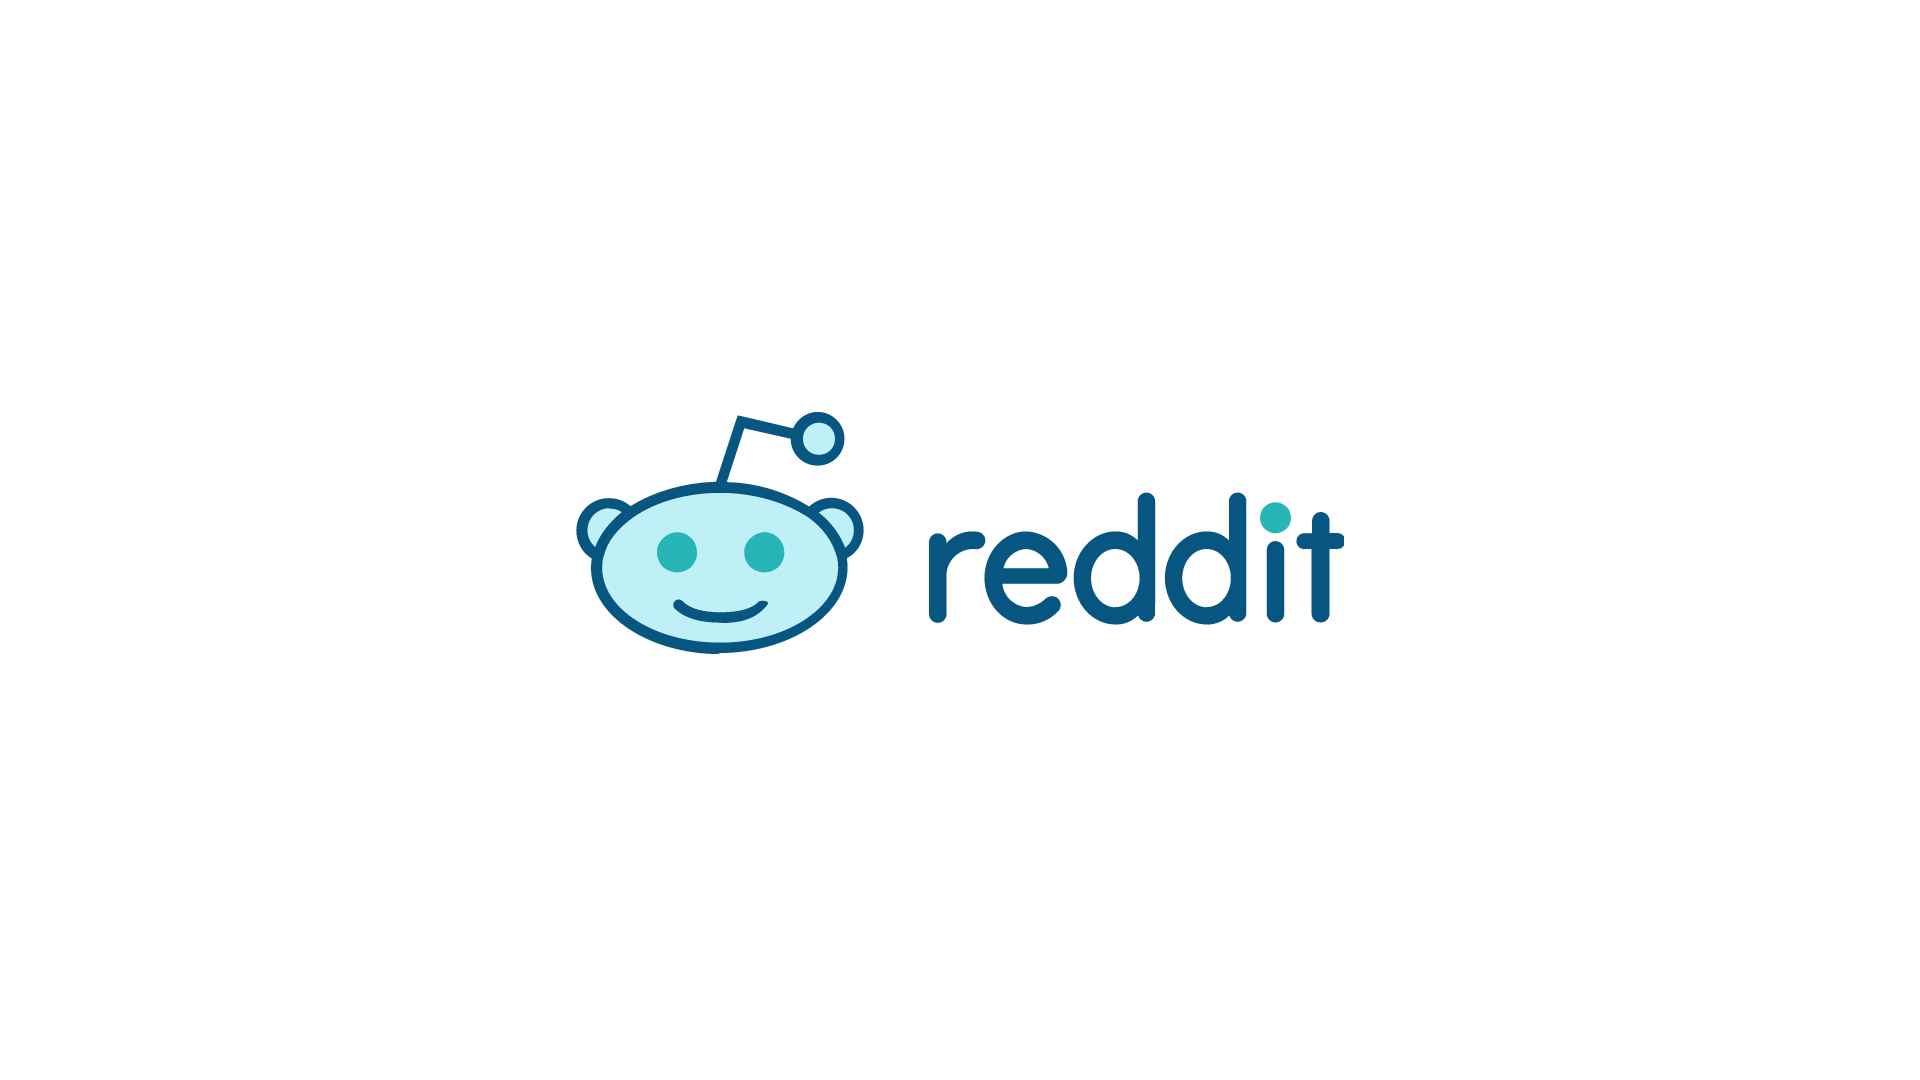 How can one report or flag inappropriate or offensive content on Reddit?